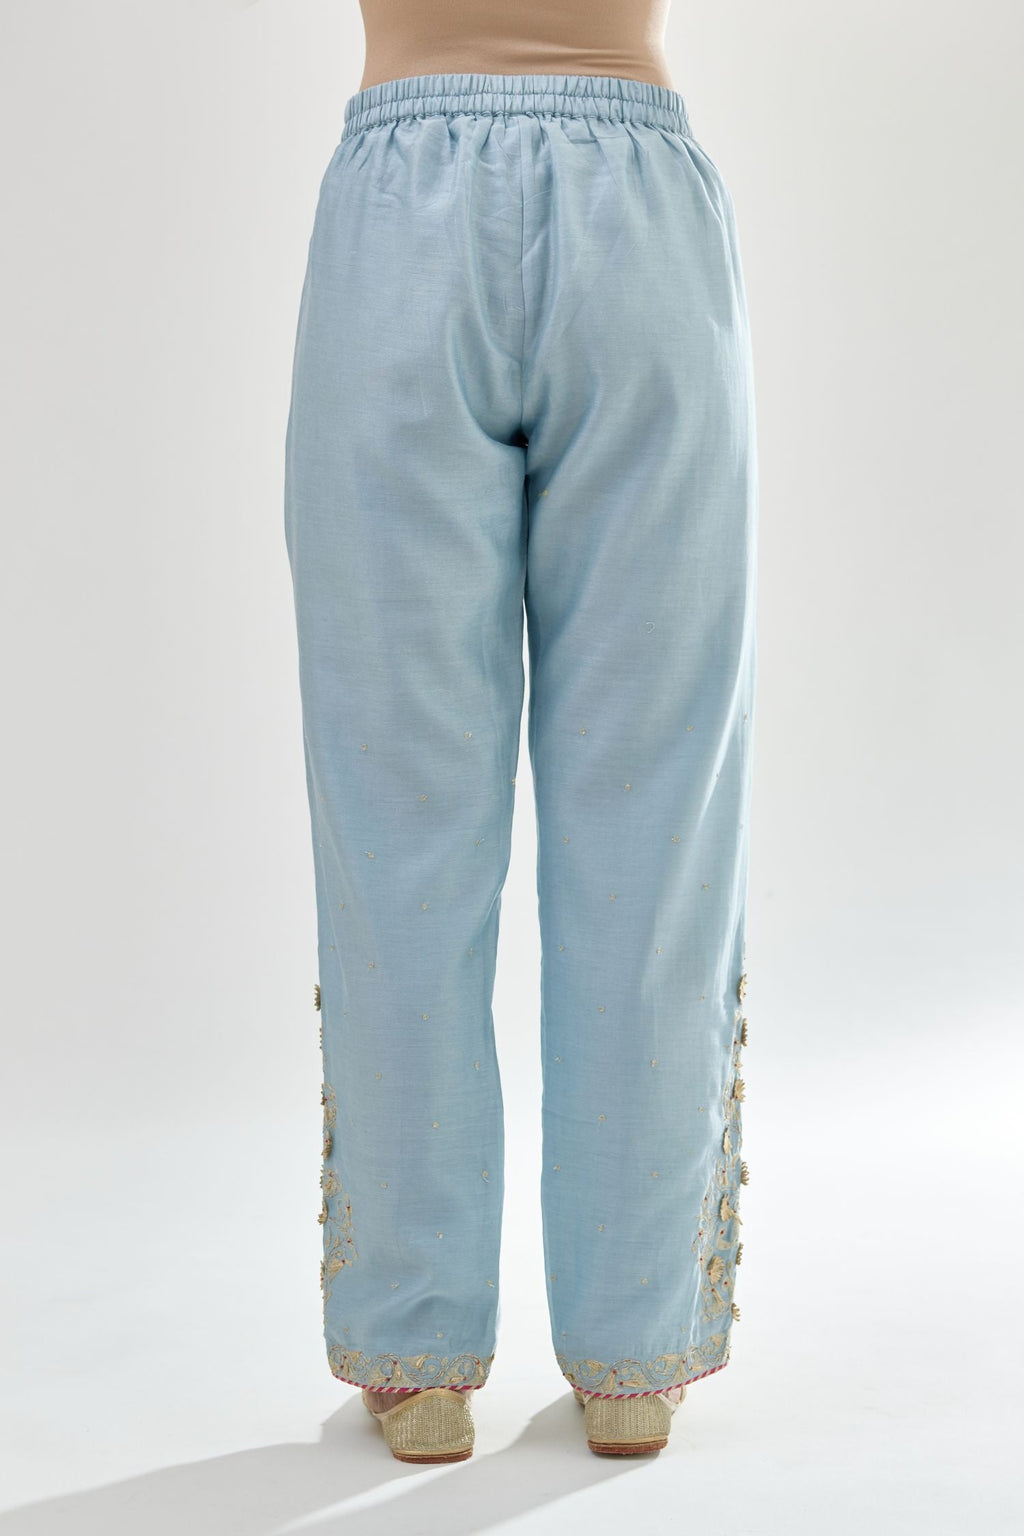 Blue silk chanderi straight pants, hem is detailed with zari, dori and gota embroidered boota at sides.